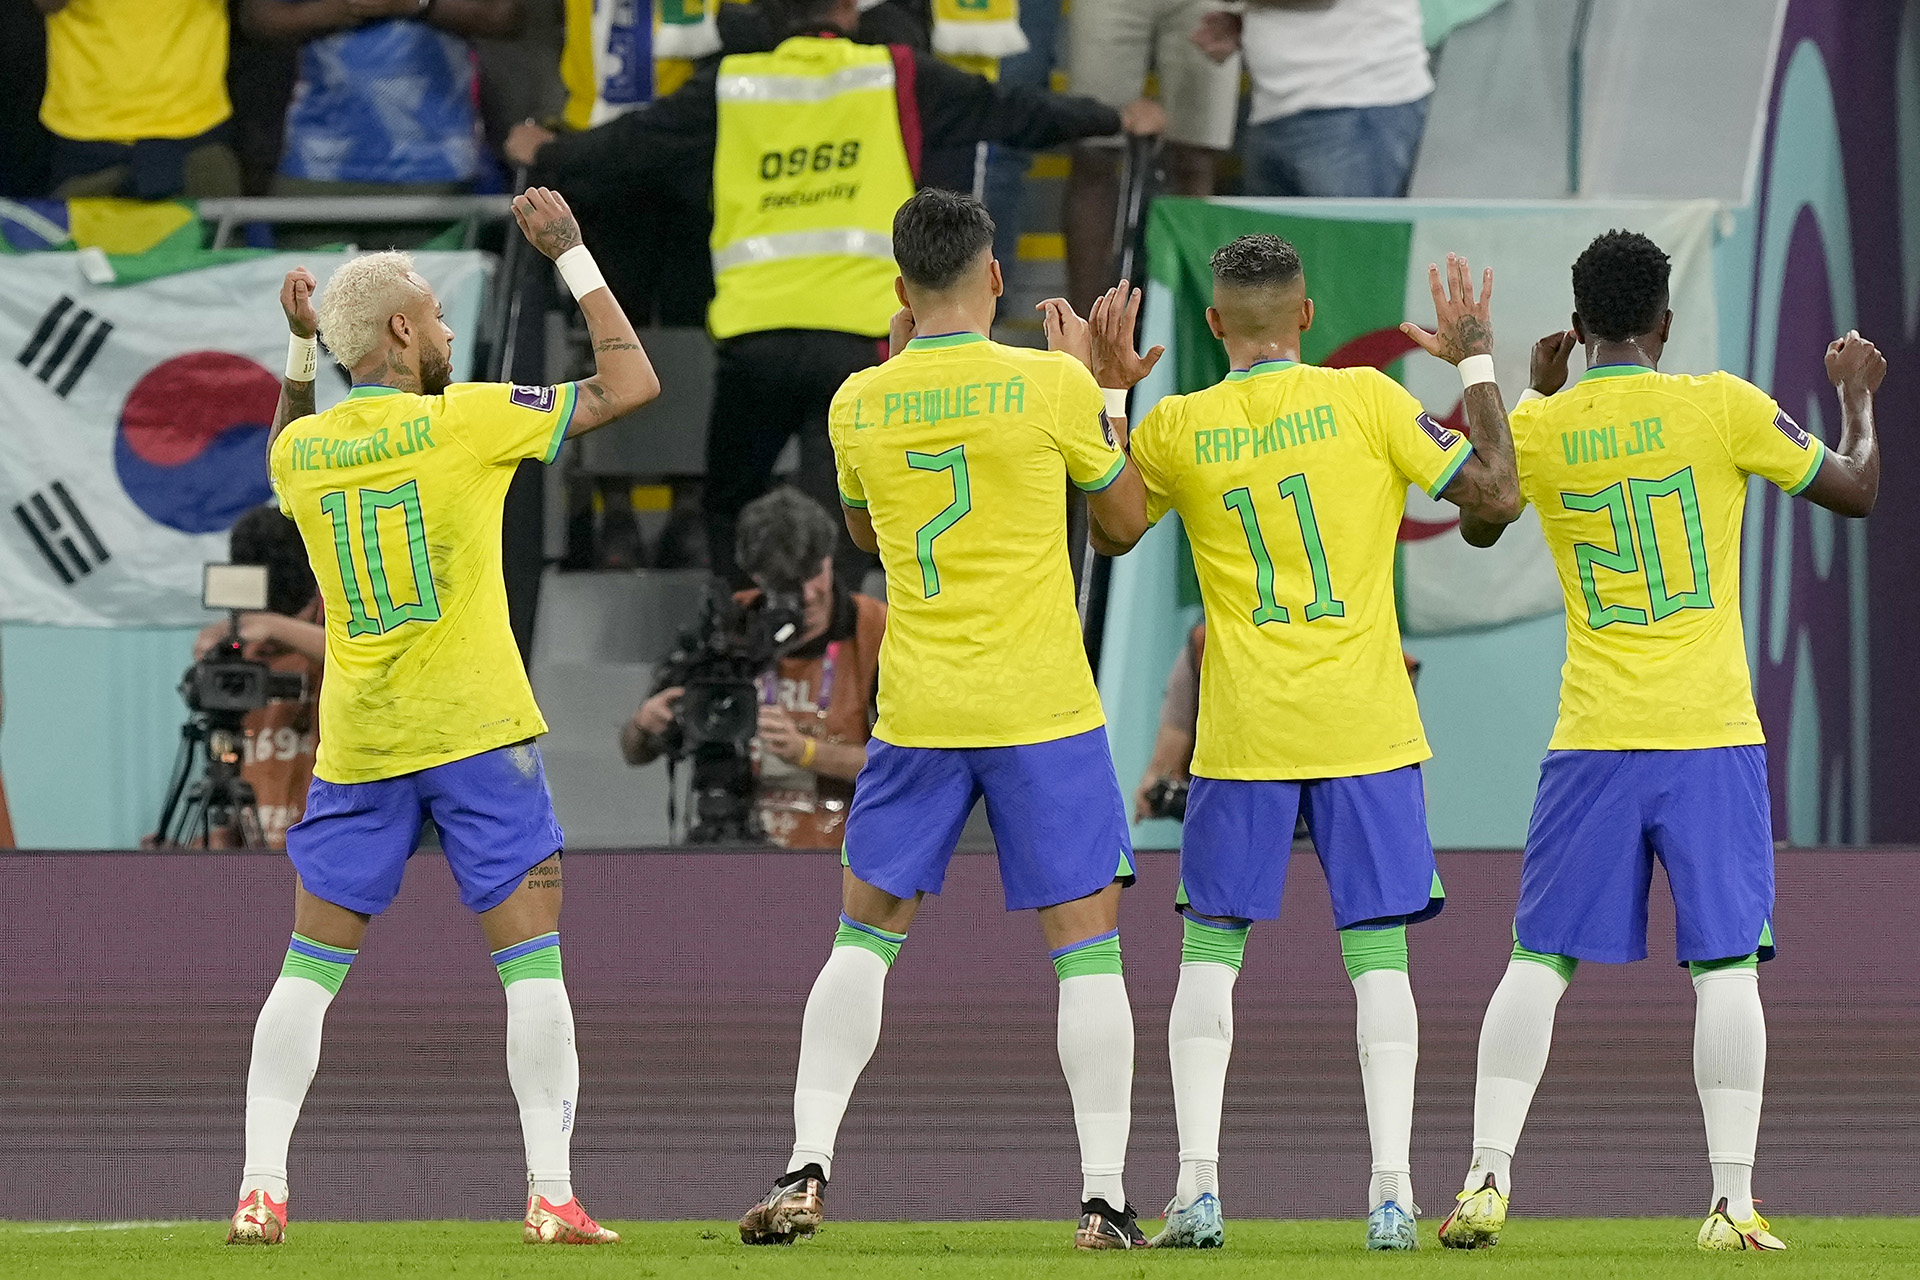 Brazil's Neymar, left, celebrates after scoring his side's second goal from the penalty spot during the World Cup round of 16 soccer match between Brazil and South Korea, at the Education City Stadium in Al Rayyan, Qatar, Monday, Dec. 5, 2022. (AP Photo/Martin Meissner)